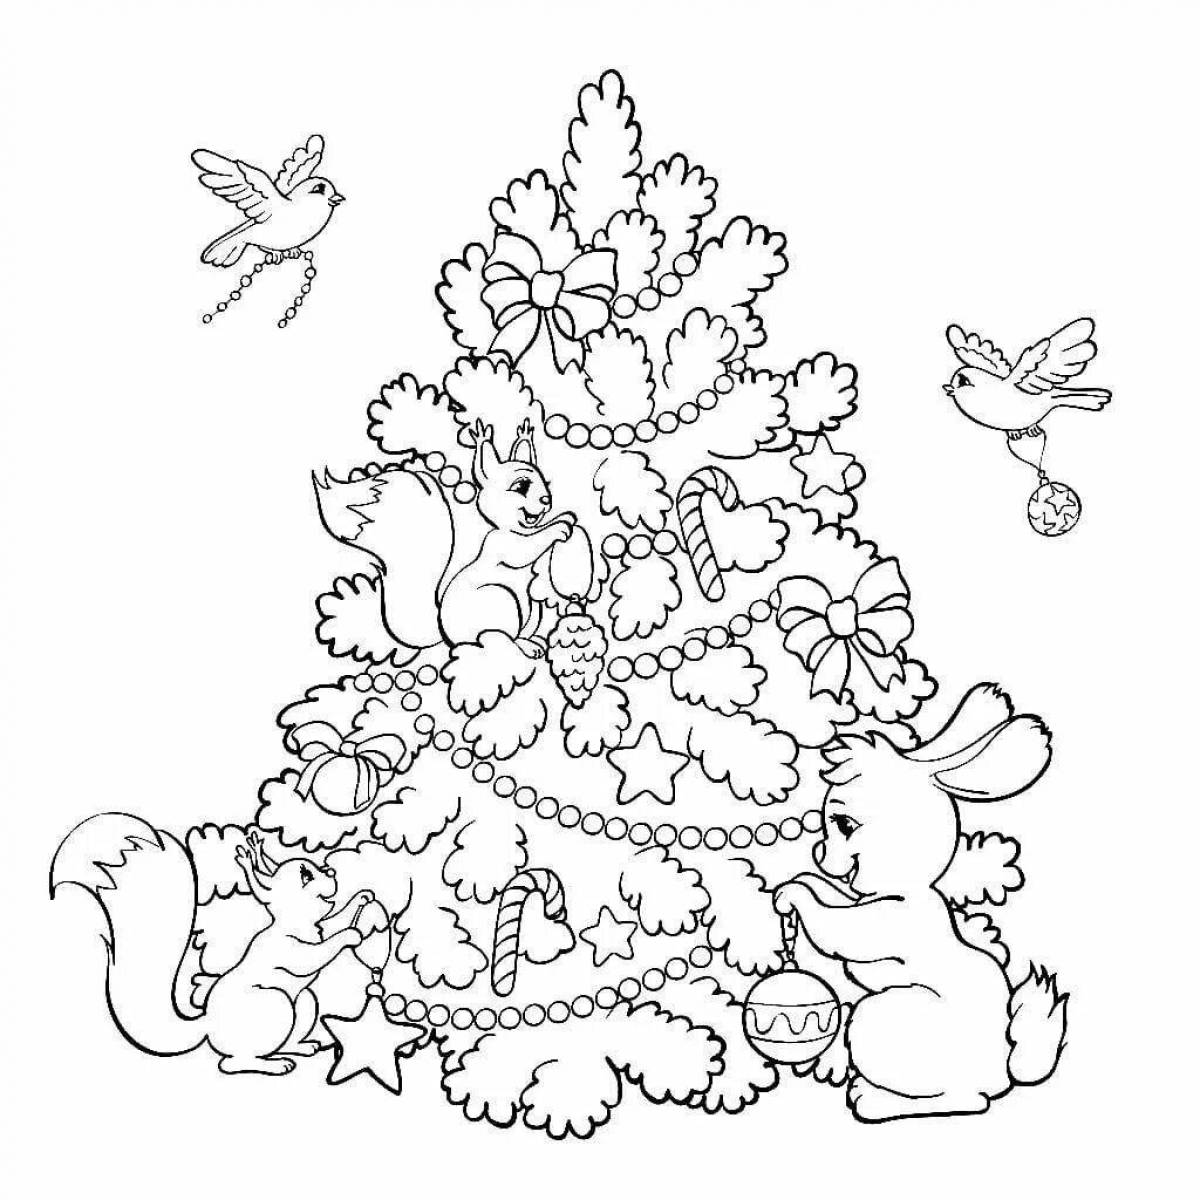 Brilliant forest grew a Christmas tree coloring book